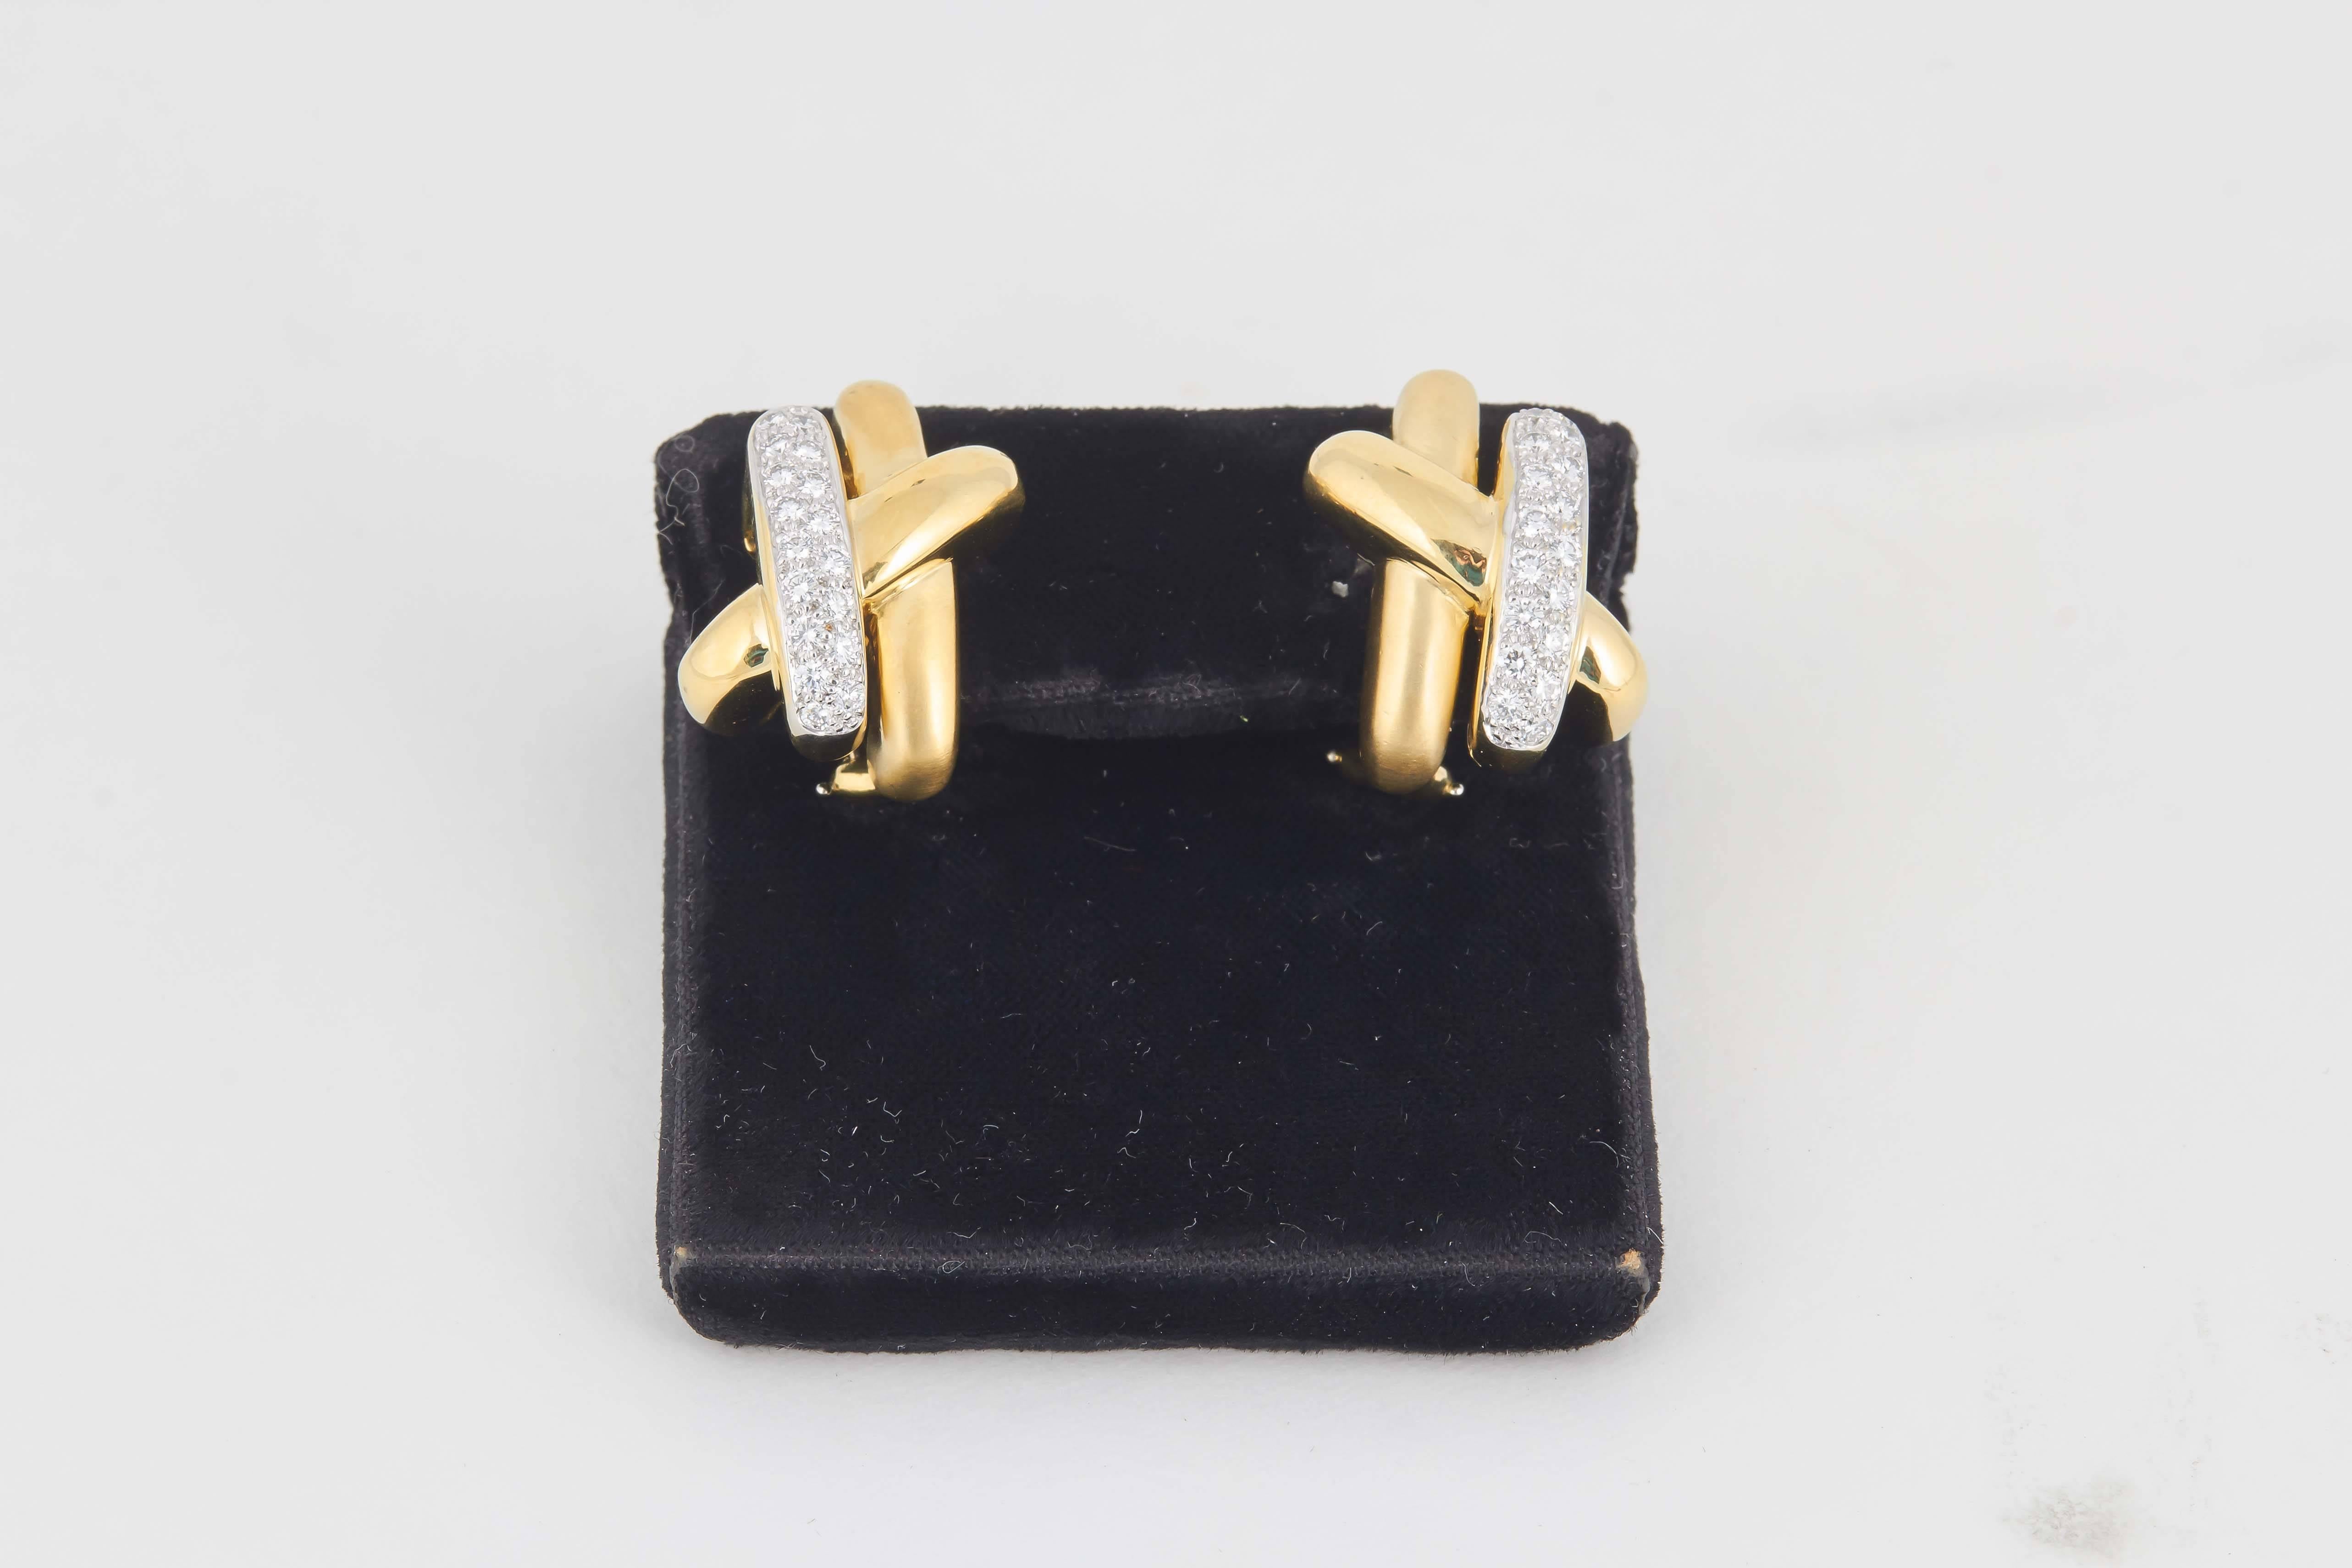 18kt High Polish And Matte Finish Twotone Gold "X" Design Three Dimensional Earrings Embellished With Approximately 2 Carats Of Superior Quality Full Cut Diamonds. Designed By Marlene Stowe In the 1980's. An American Designer. NOTE POSTS